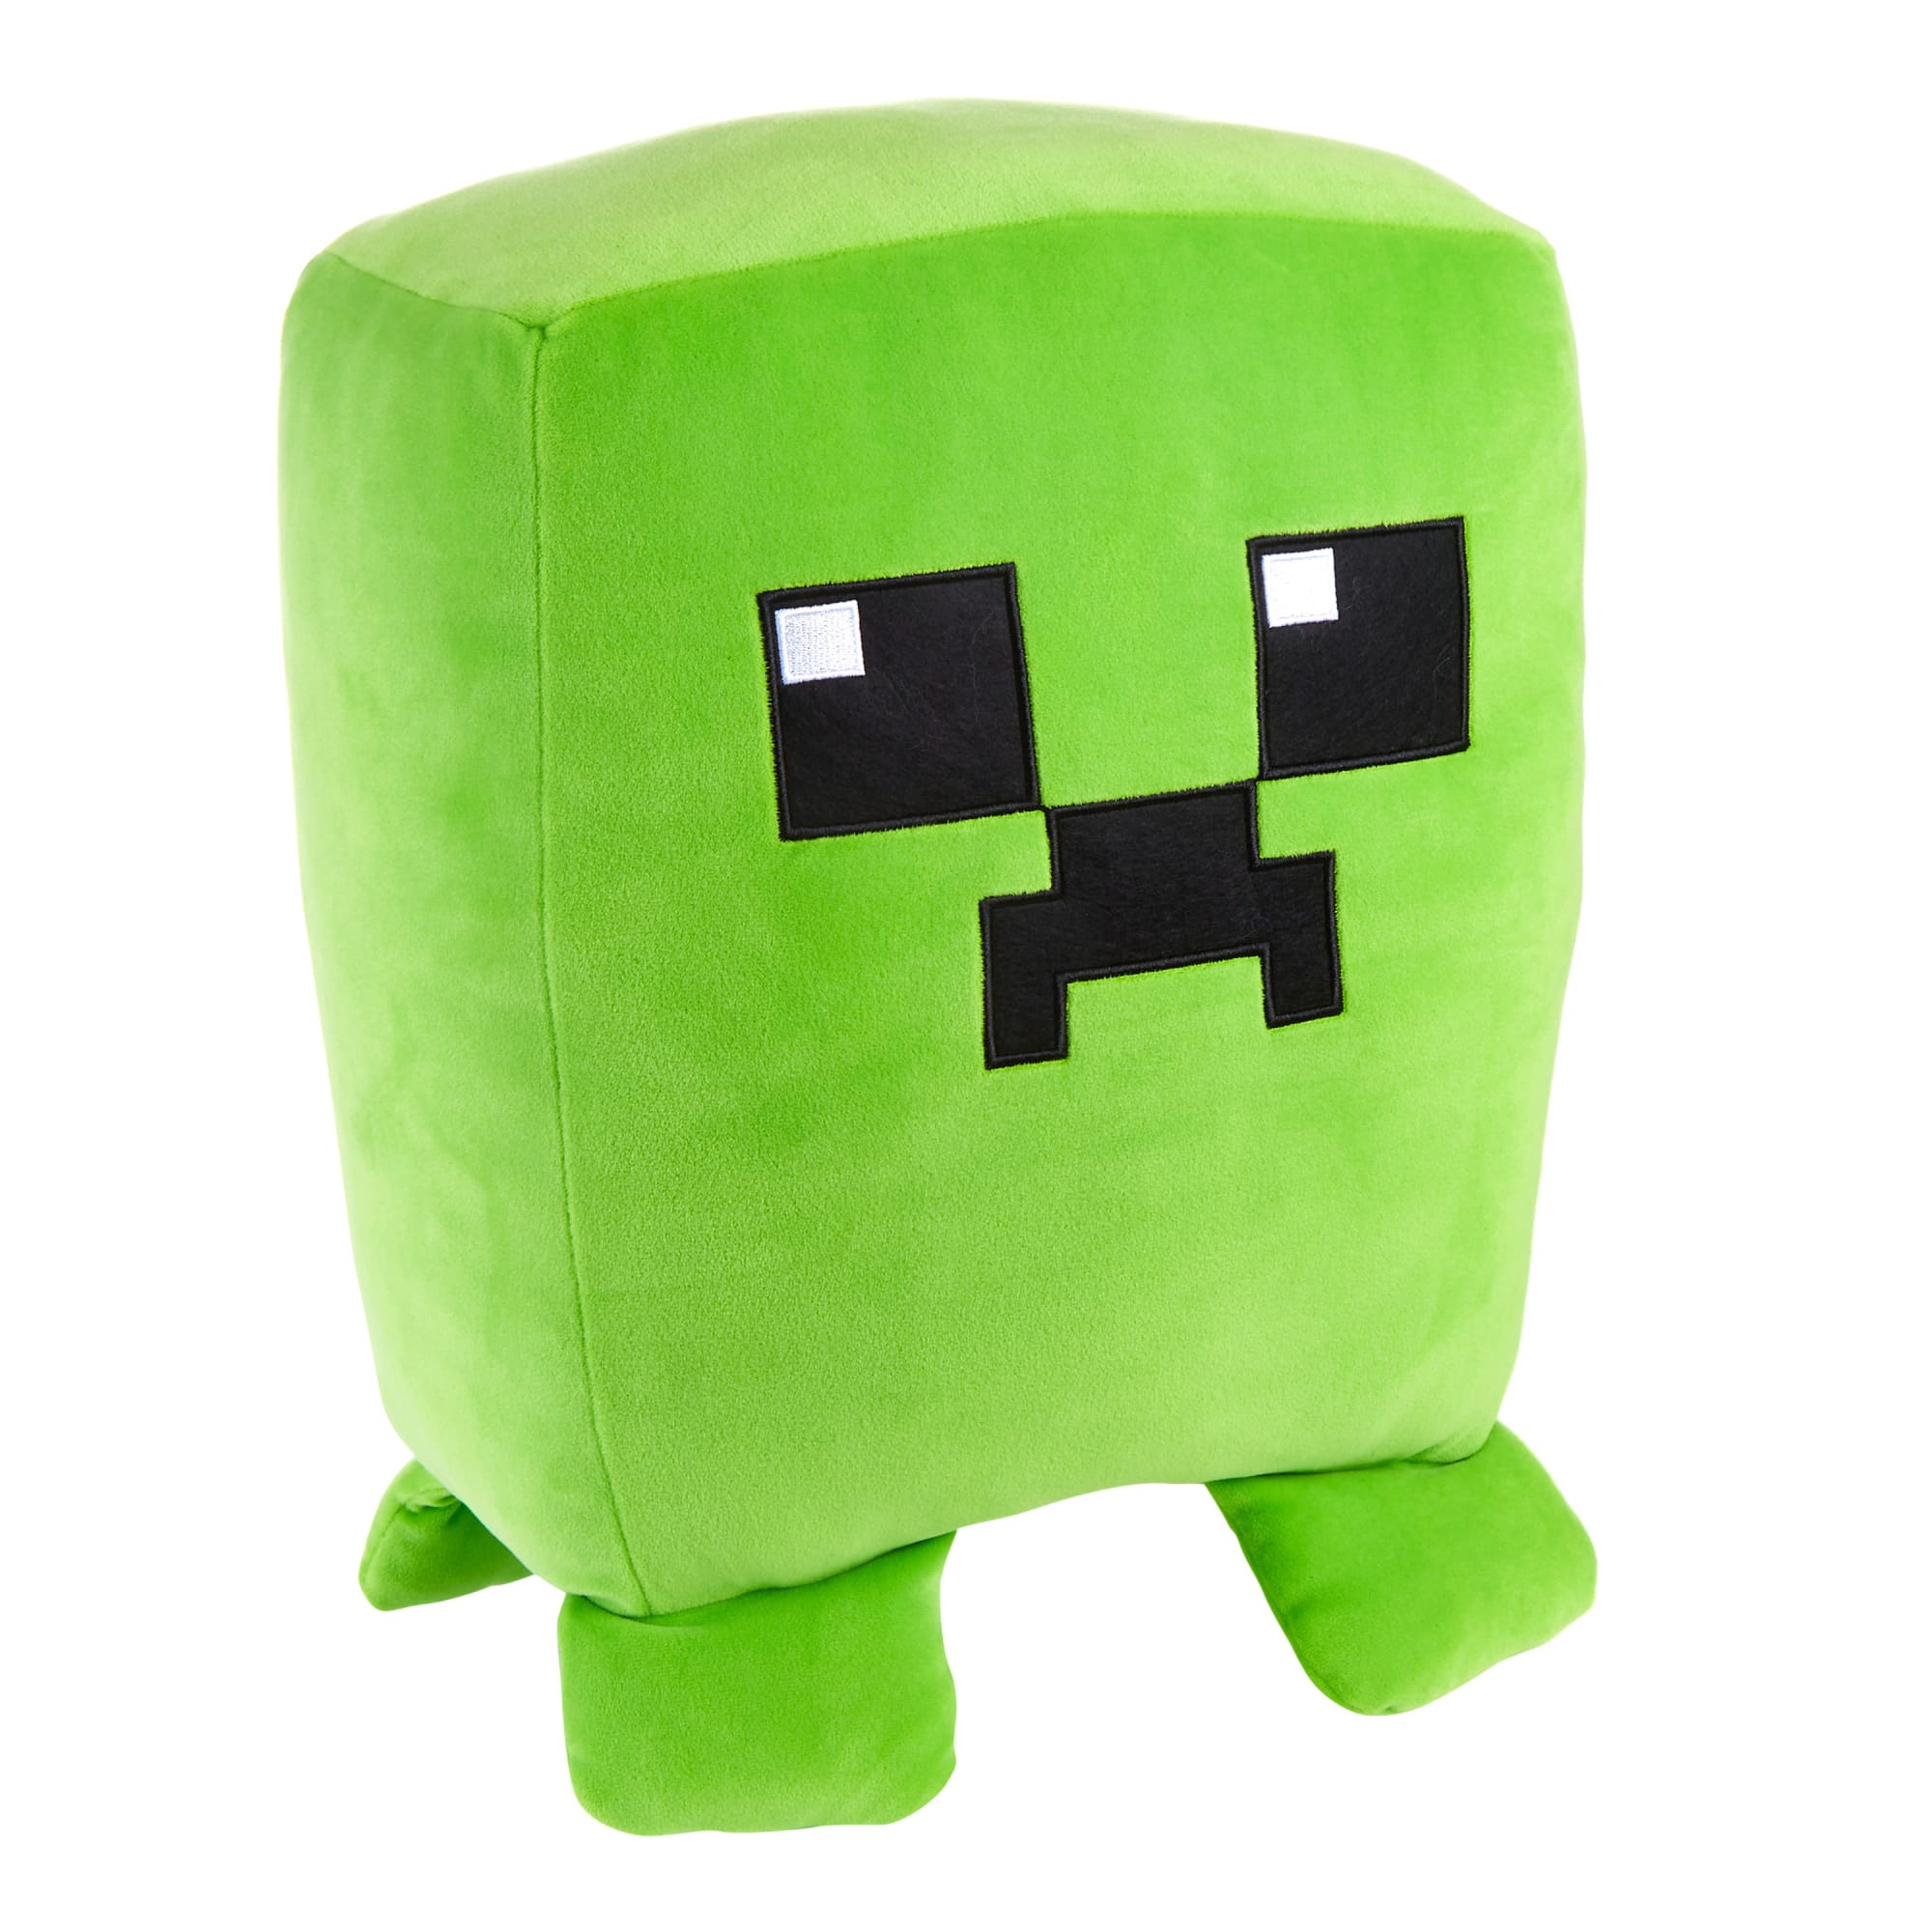 Creeper Green Wrapping Paper, Video Gamer Fan Gift Paper, Minecra